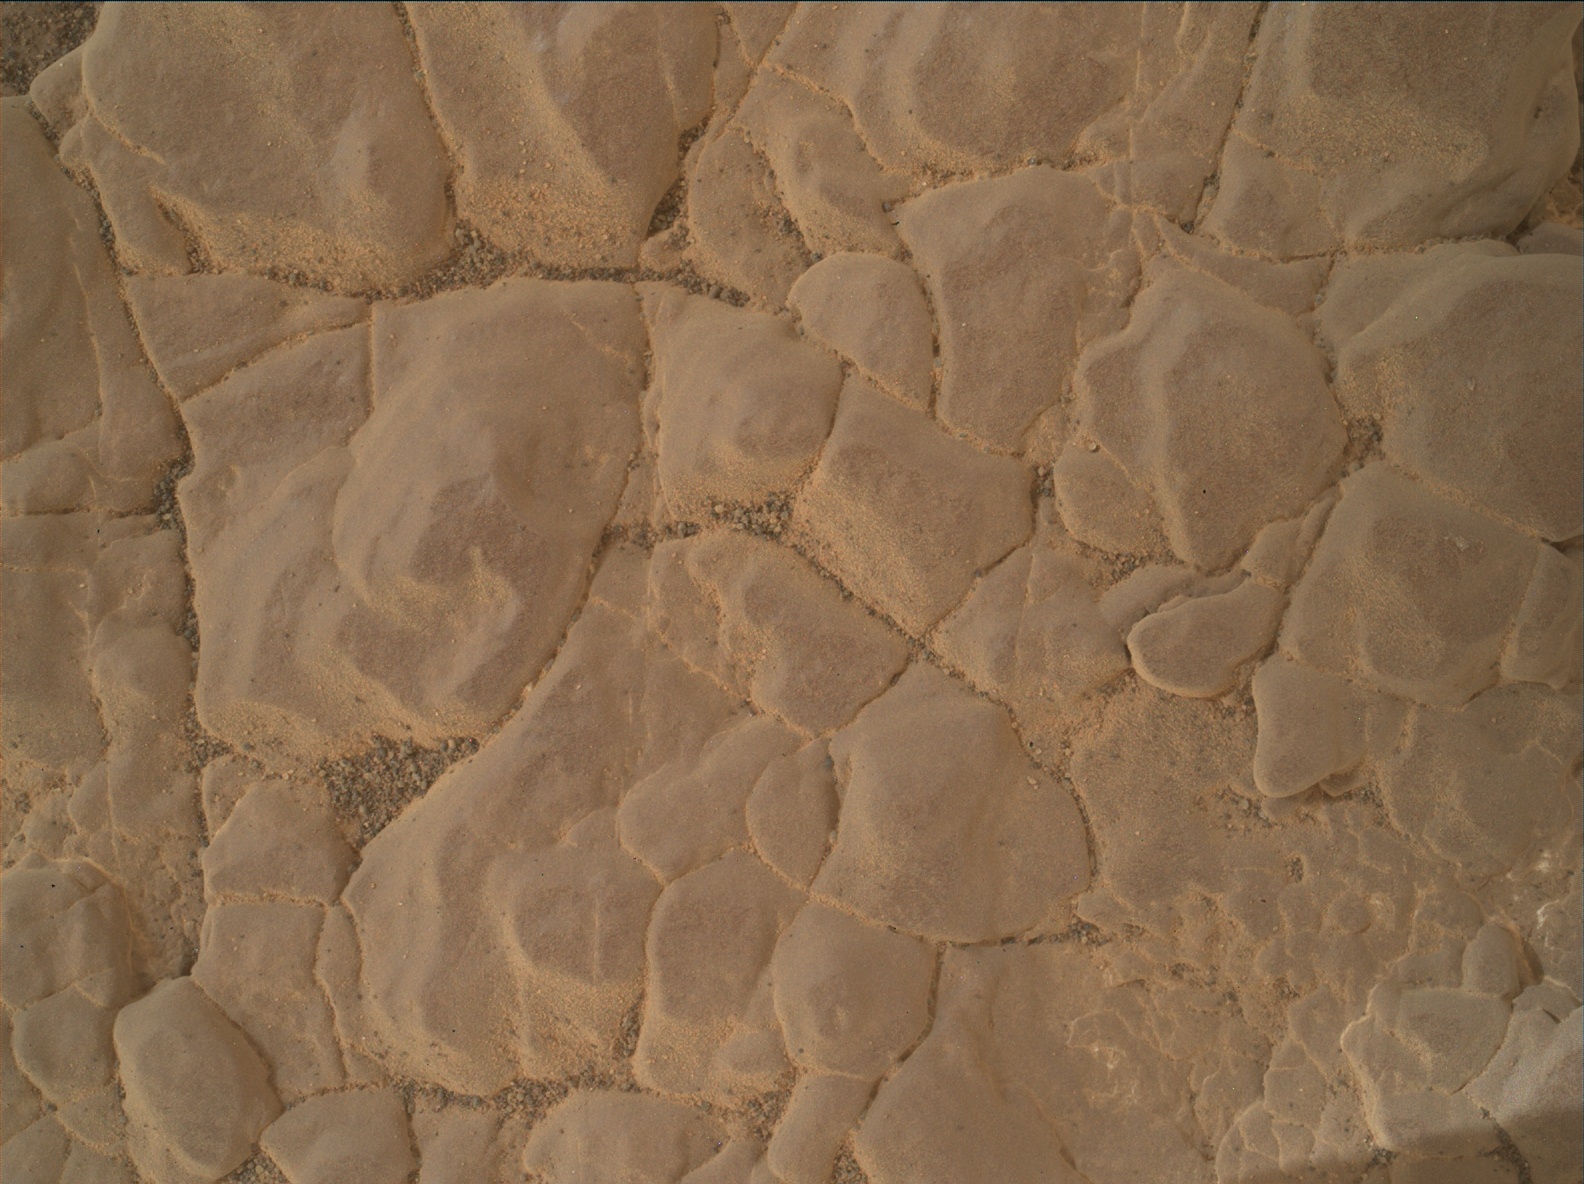 Nasa's Mars rover Curiosity acquired this image using its Mars Hand Lens Imager (MAHLI) on Sol 3011